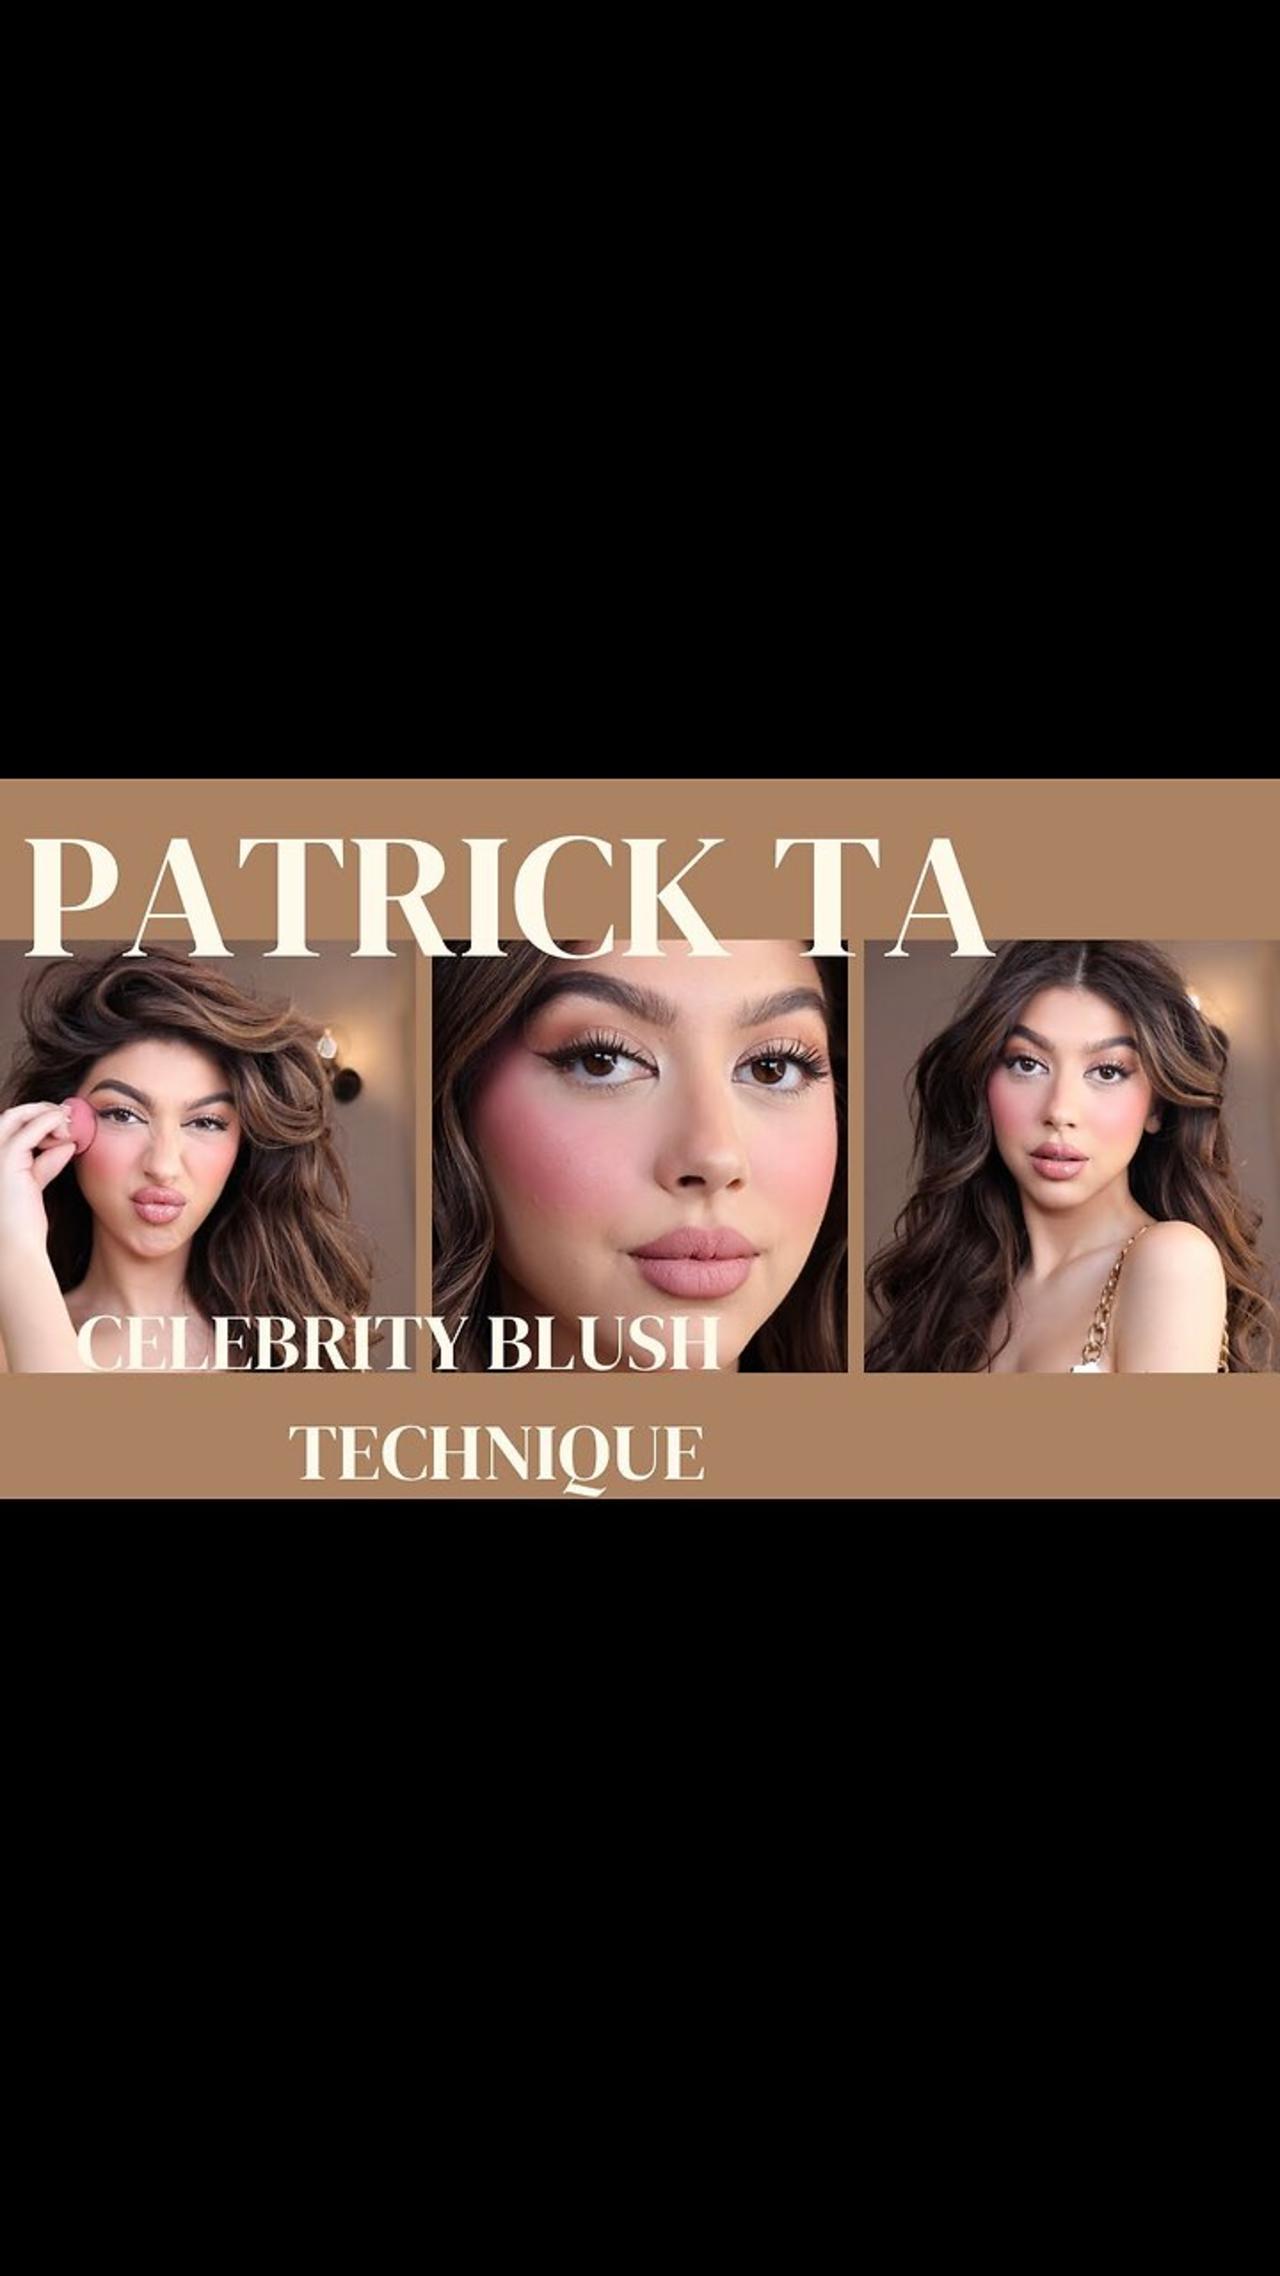 Can you put cream on top of powder Let’s try the Patrick ta blush makeup techniq